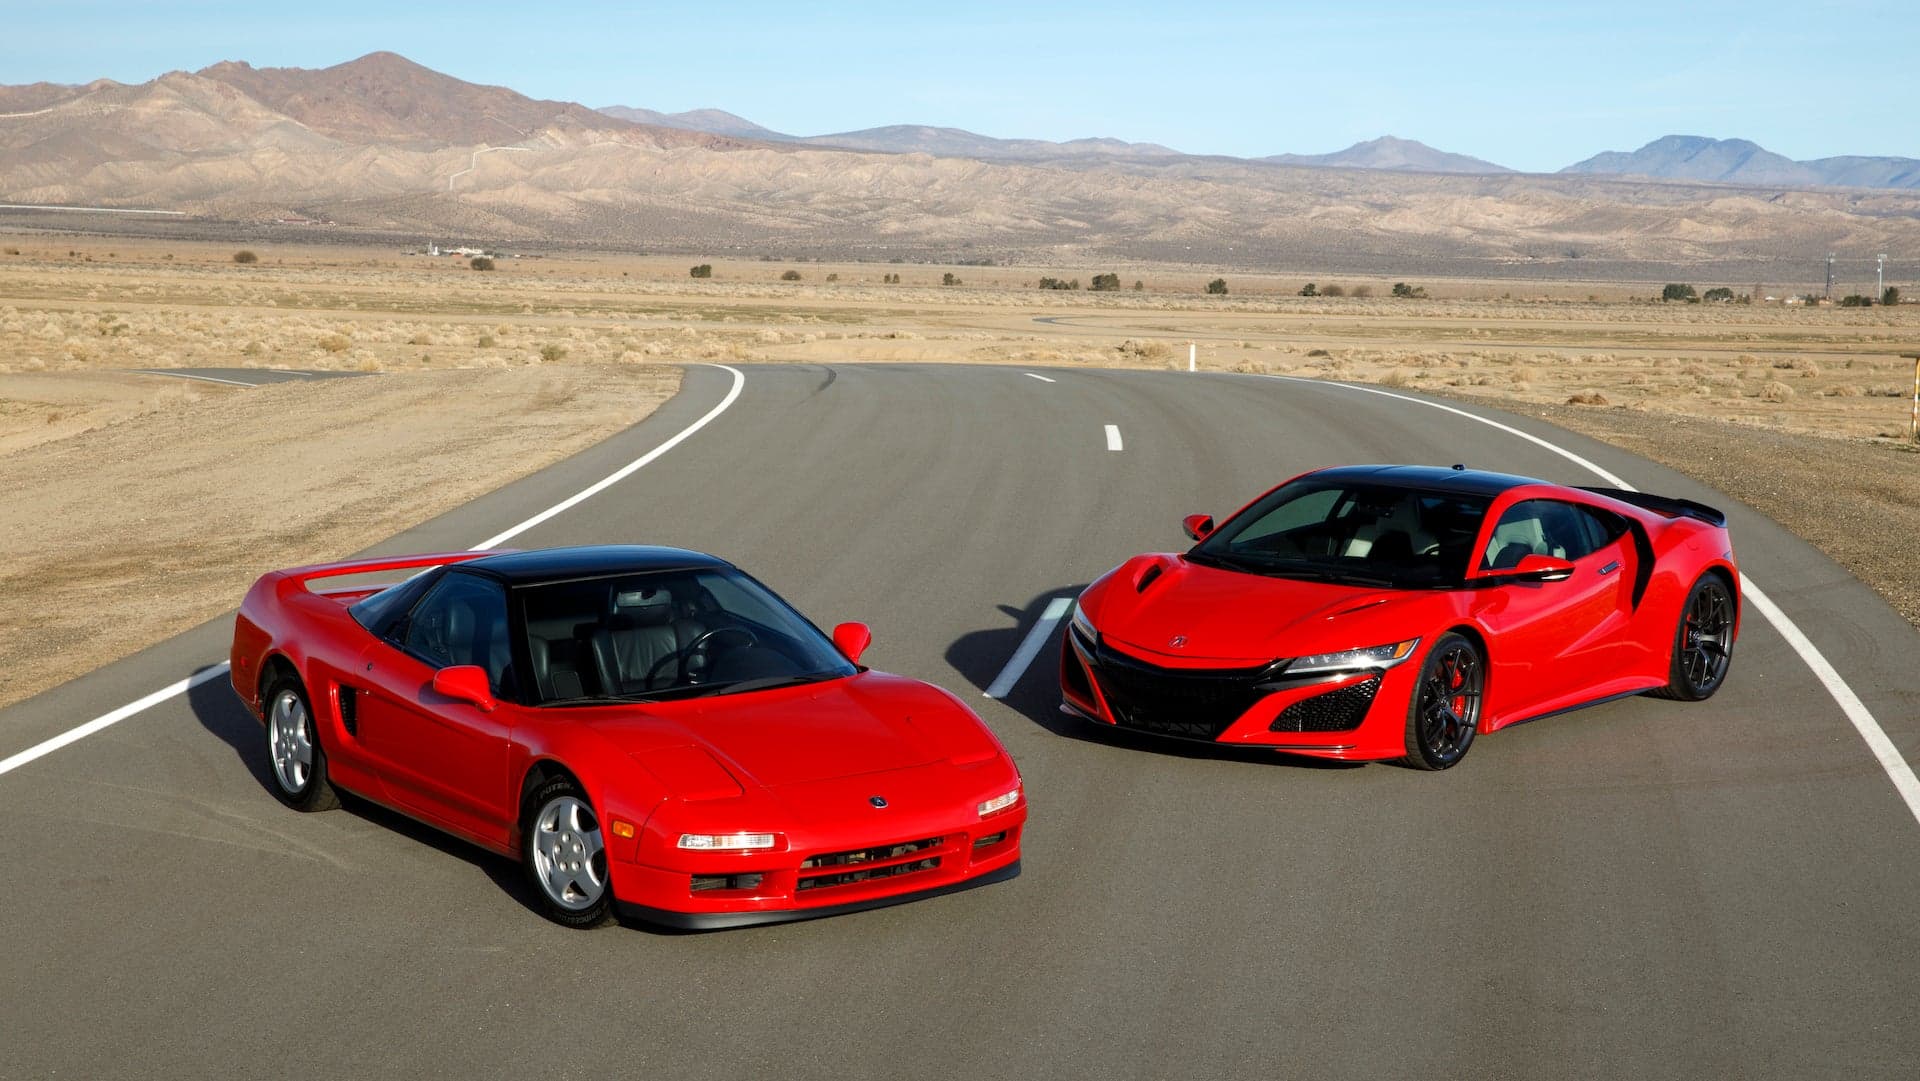 Three Little-Known Facts About the Original Acura NSX Supercar